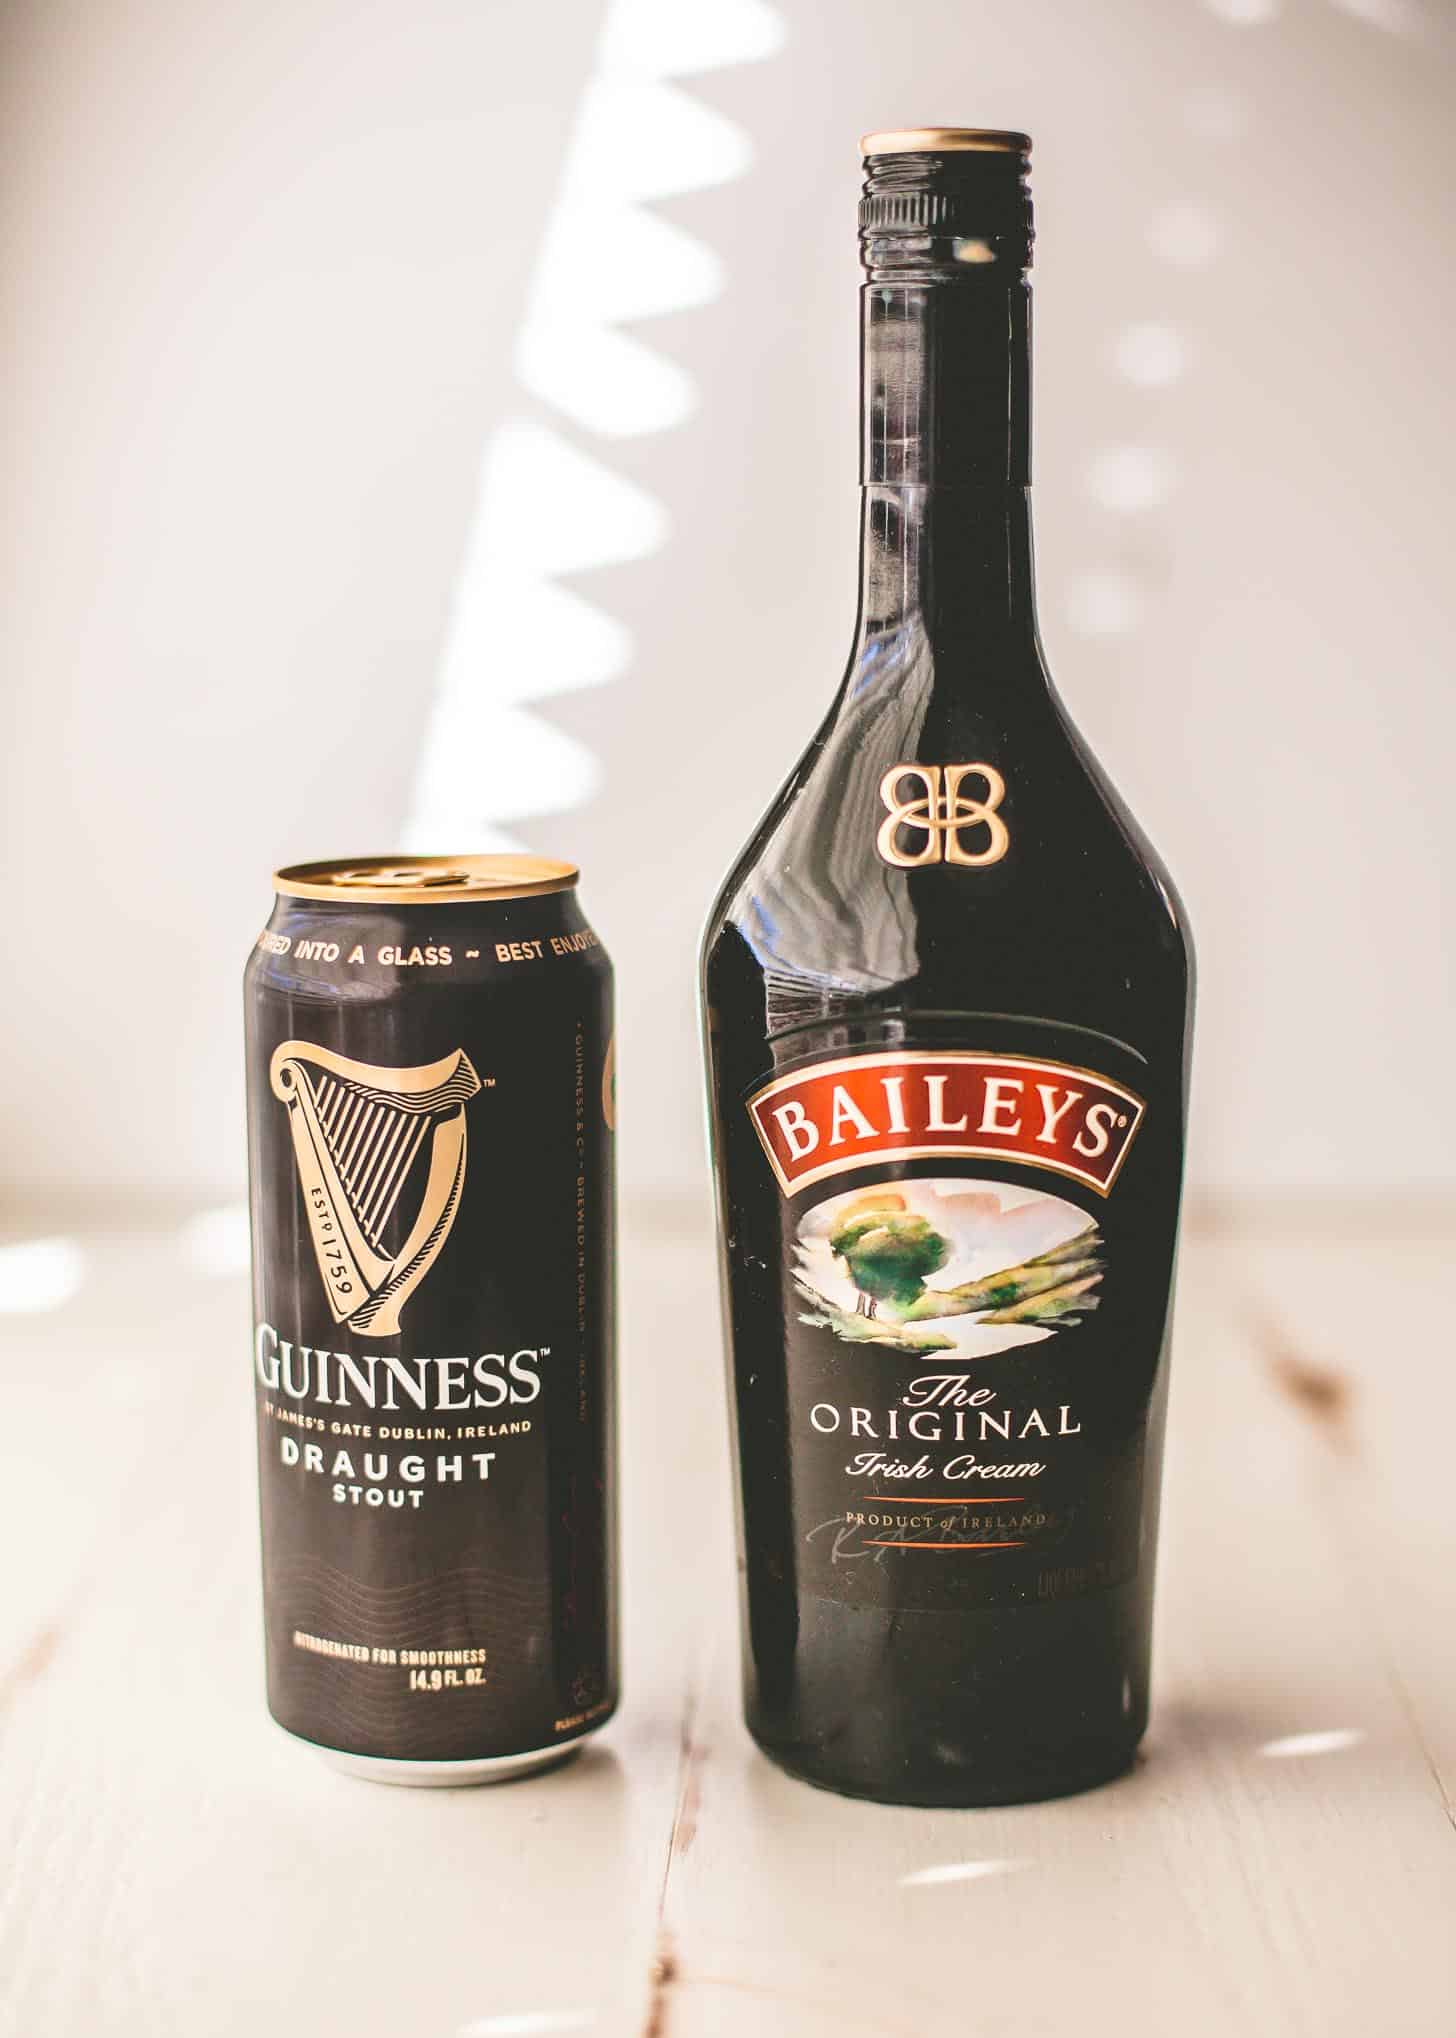 Guinness and Bailey's on a white tabletop